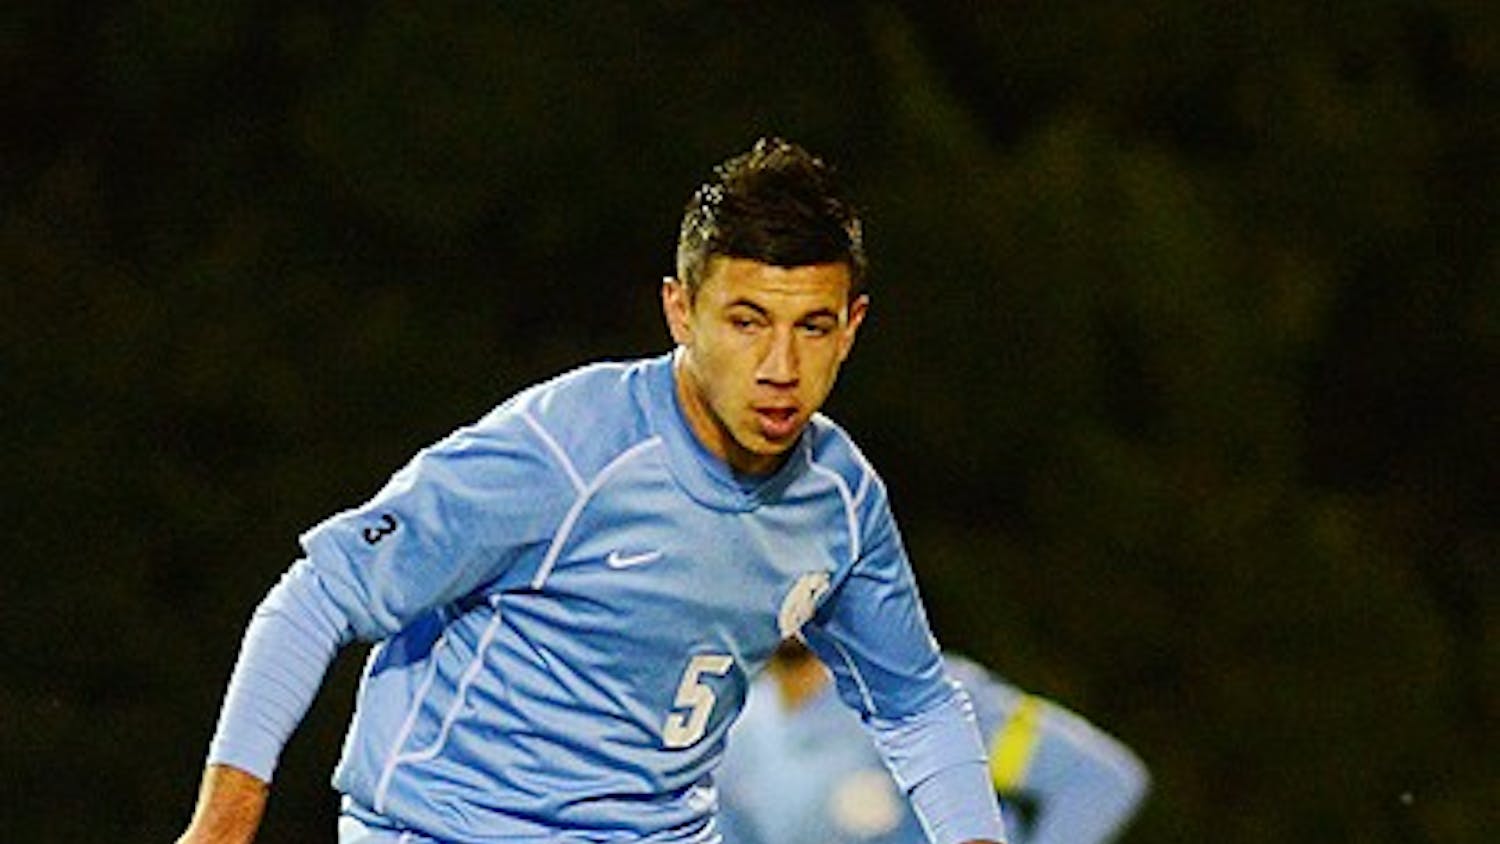 	UNC midfielder Mikey Lopez, of Mission, Texas, is likely to be a top pick in today’s MLS SuperDraft.